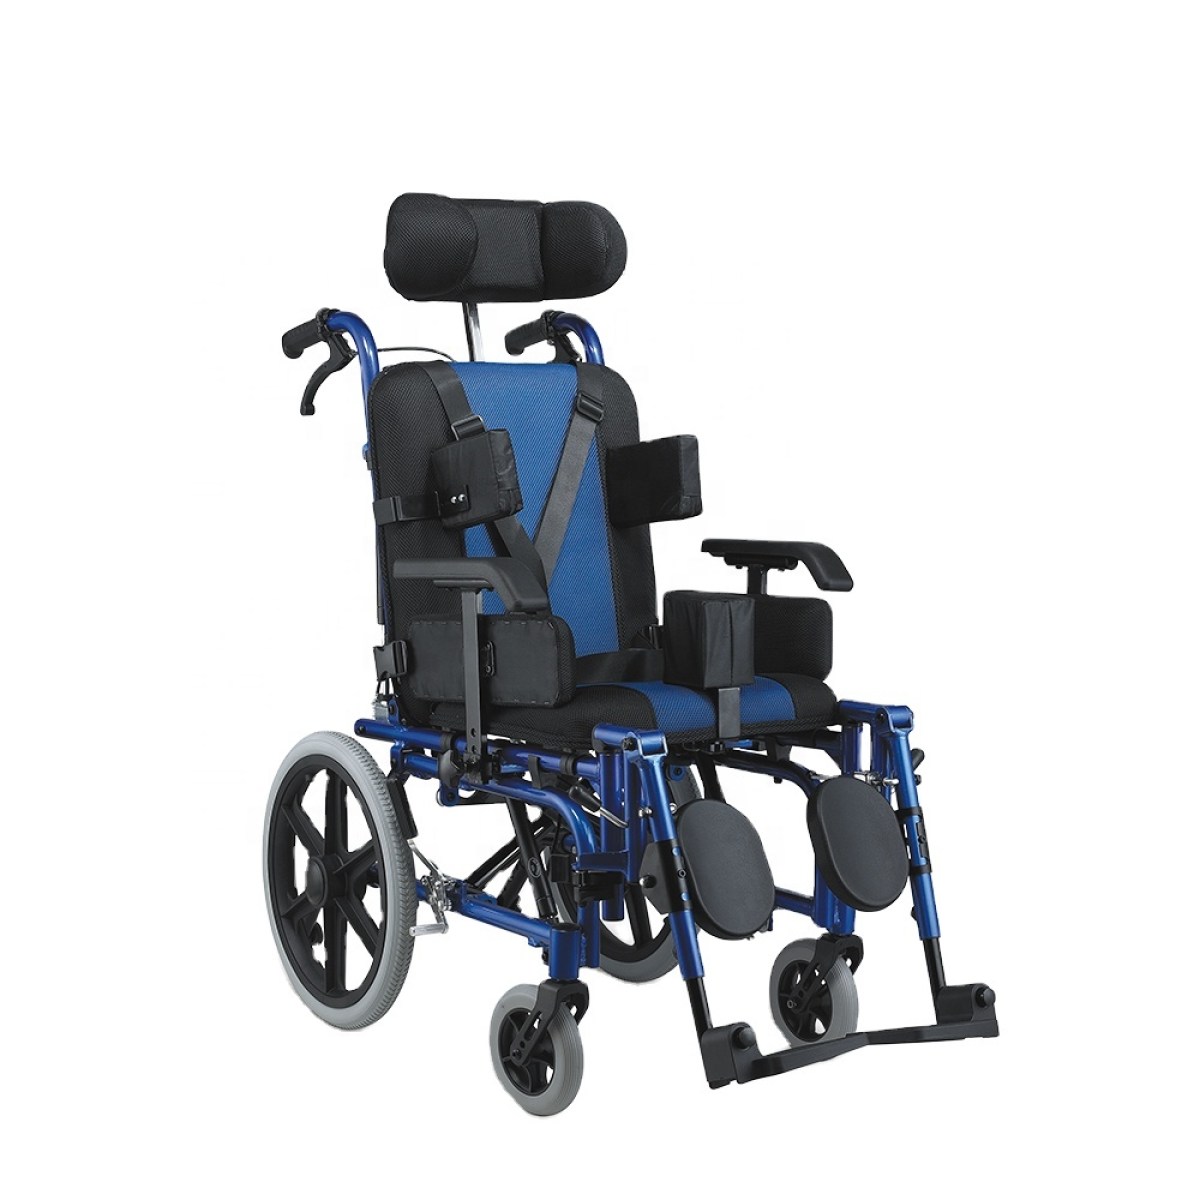 Picture of: Adult Wheel Chair For Stroke Patients Hospital Wheelchair High Back Support  Cerebral Palsy People Reclining Power – Buy Adult Wheel Chair For Stroke